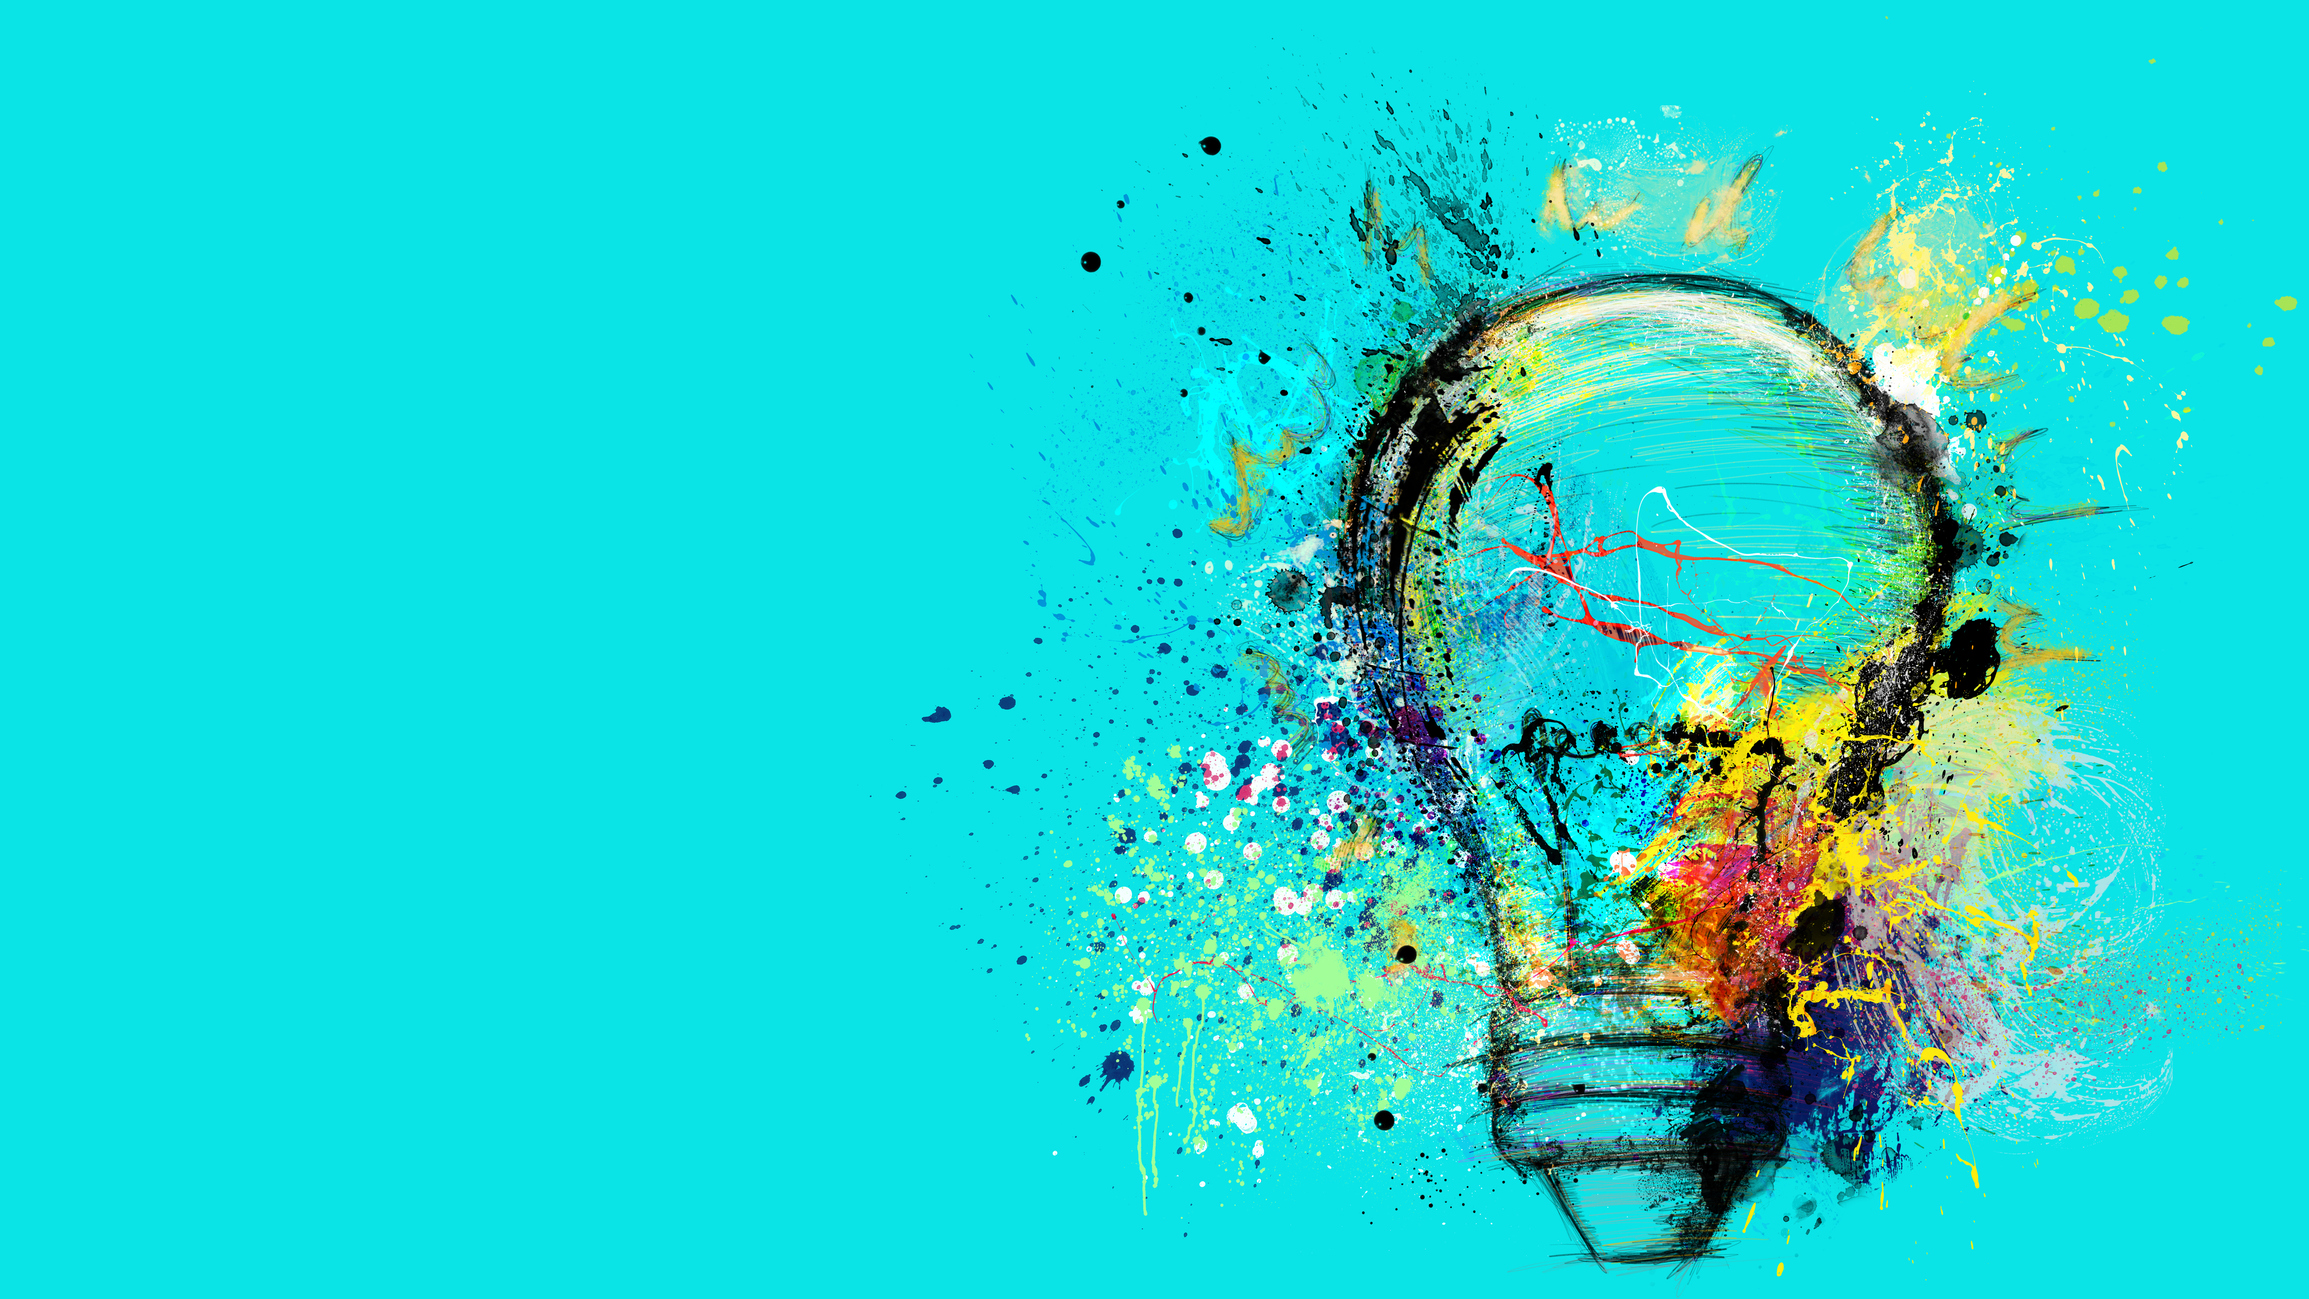 Big stylized light bulb on cyan background drawn with splashes of colored paint.